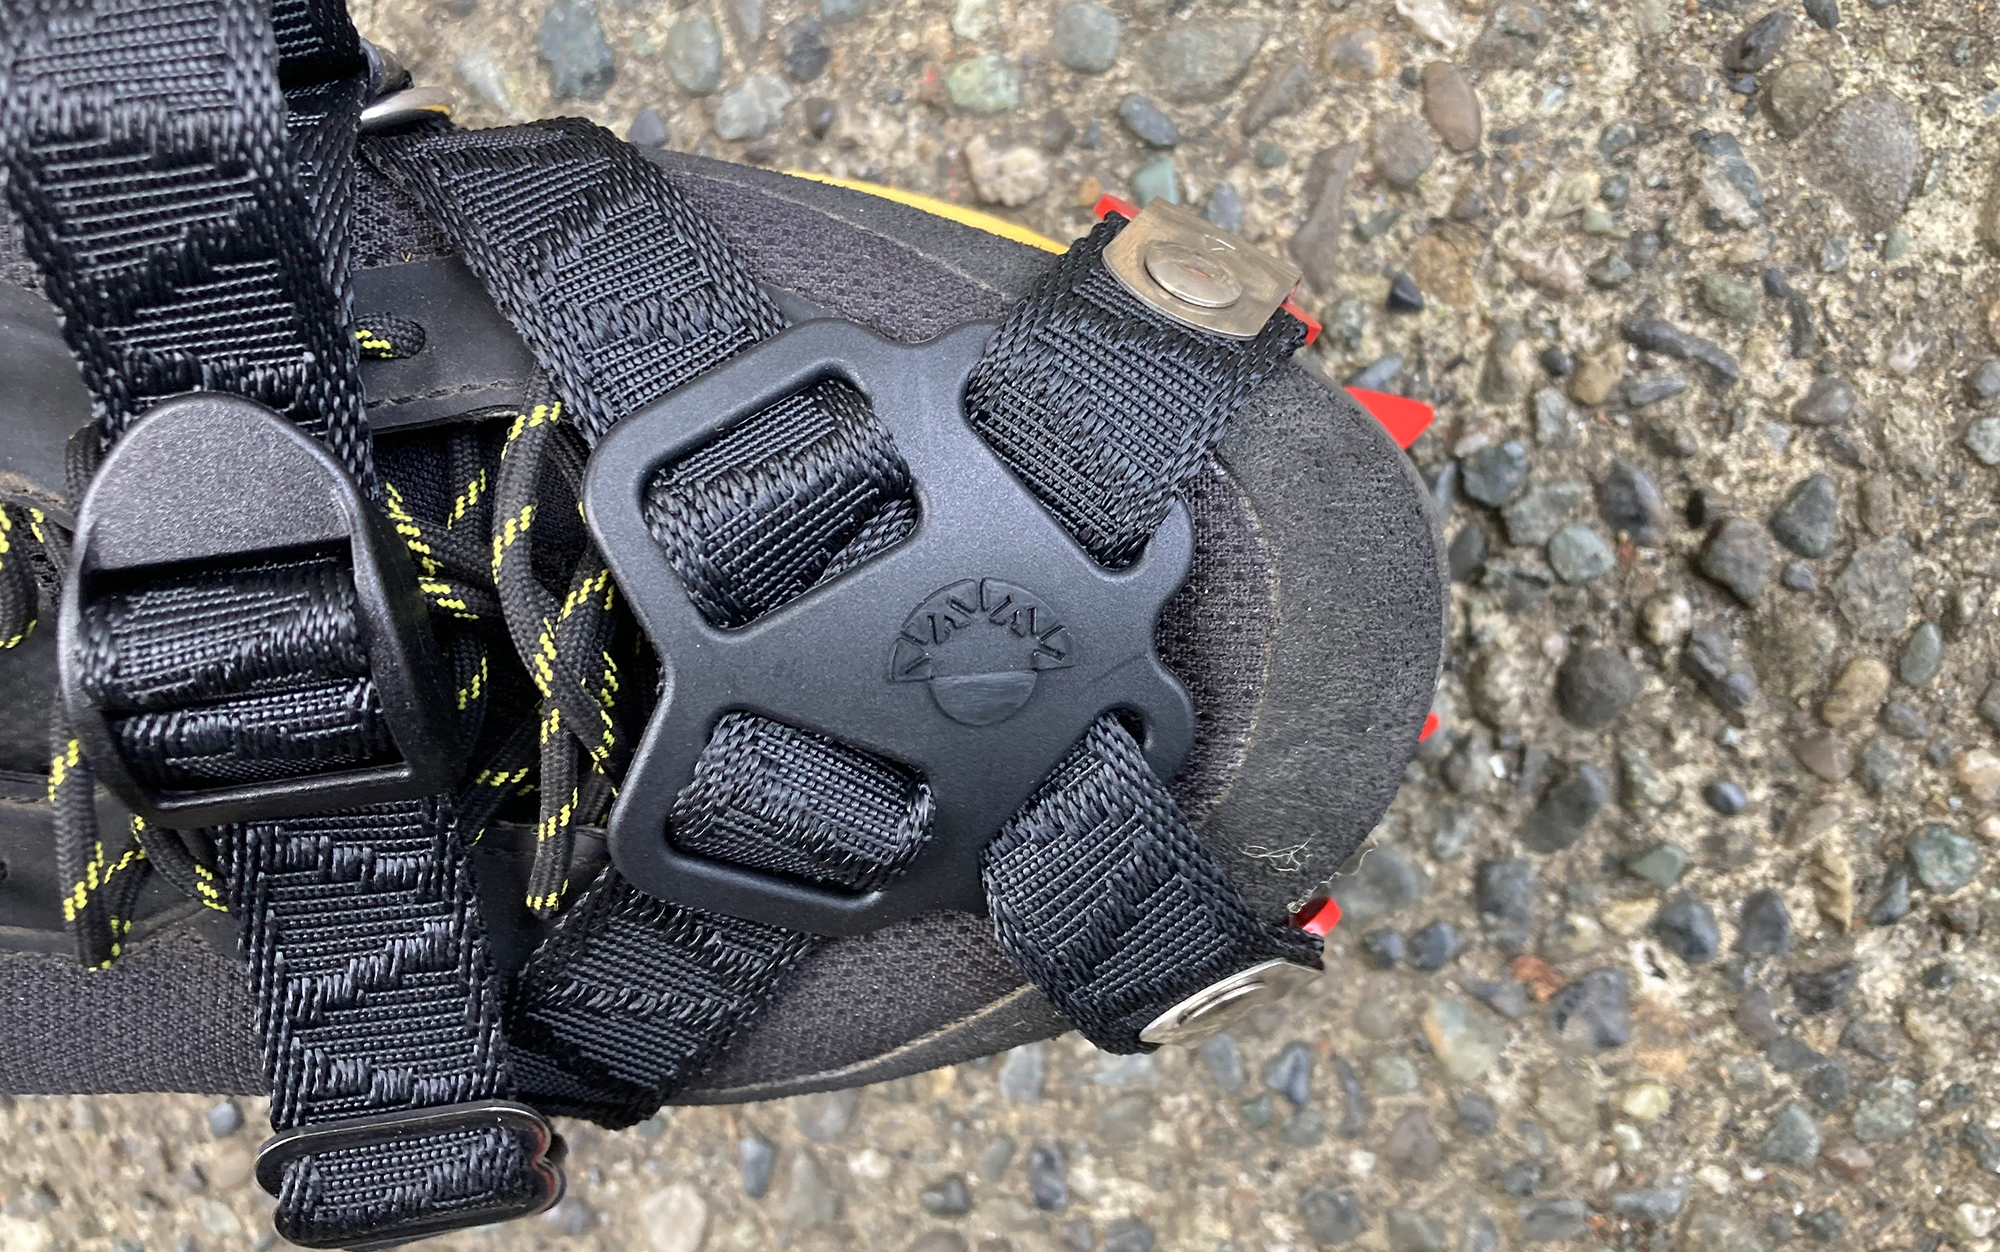 The straps of the Kahtoola crampons secure to any hiking shoe.